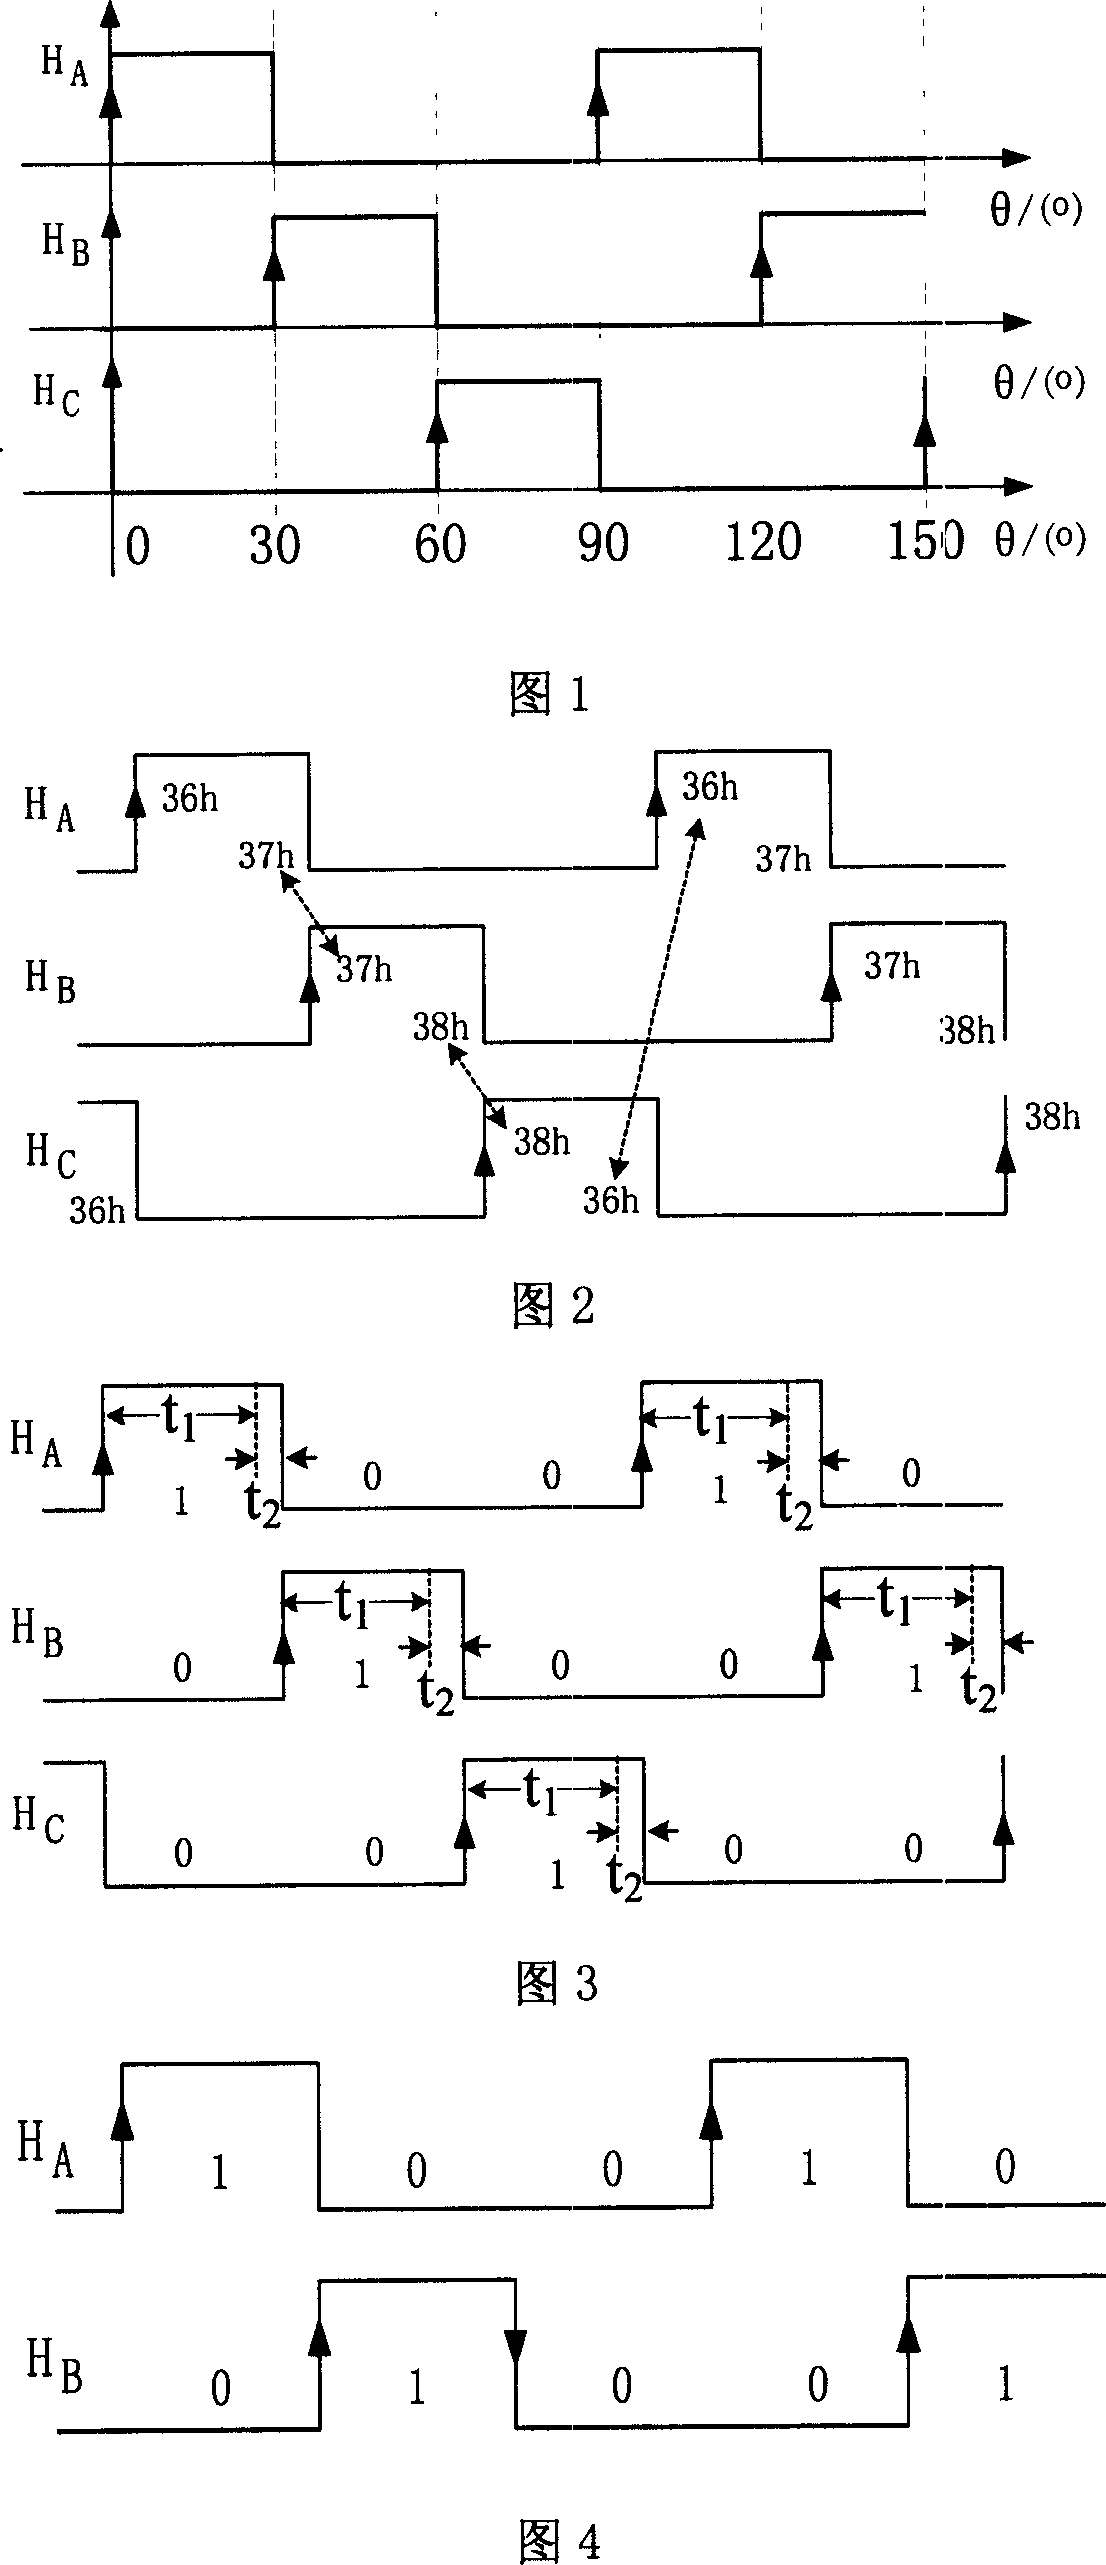 Fault diagnosis and fault-tolerant control method for brushless motor position signal